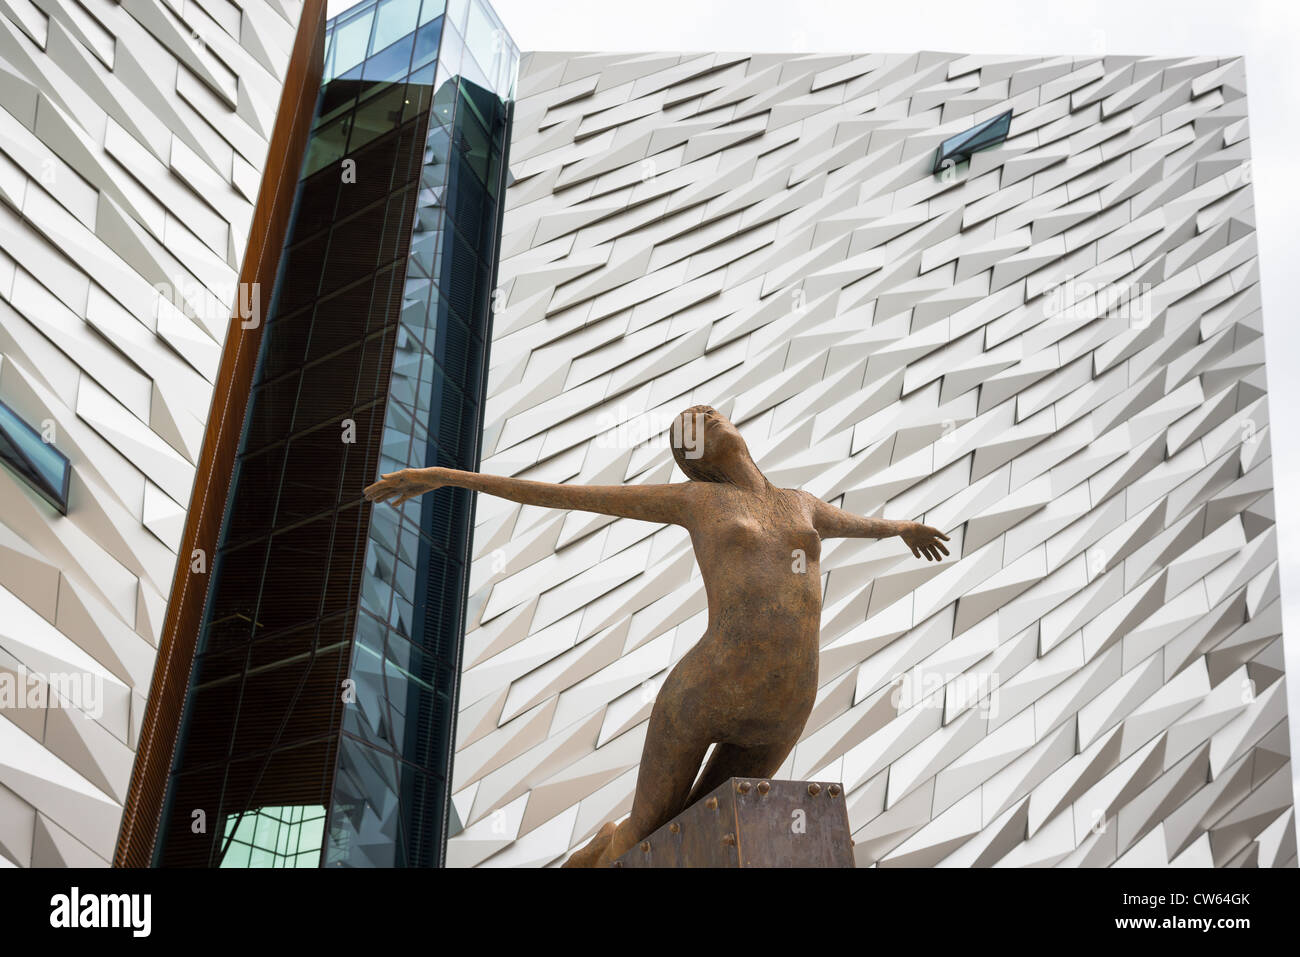 Titanica sculpture in front of Titanic Belfast visitor attraction and monument in Titanic quarter of Belfast, Northern Ireland. Stock Photo